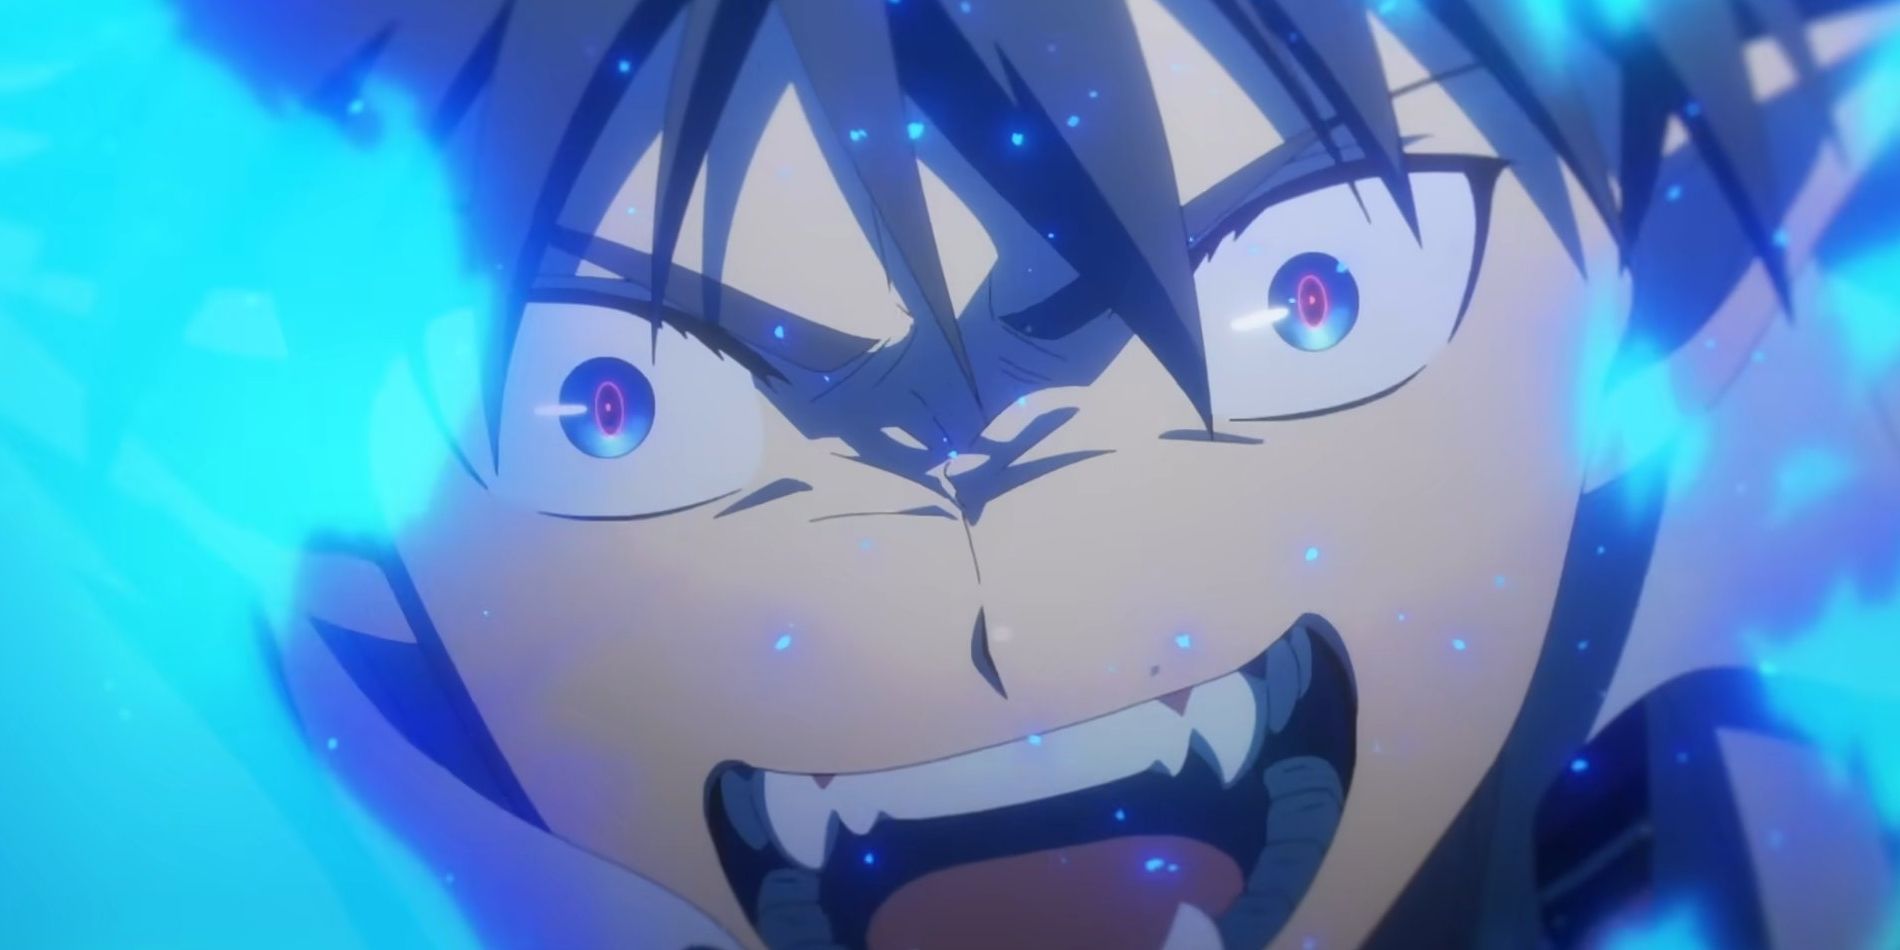 A close-up of Rin Okumura from the new season of Blue Exorcist showing his fangs